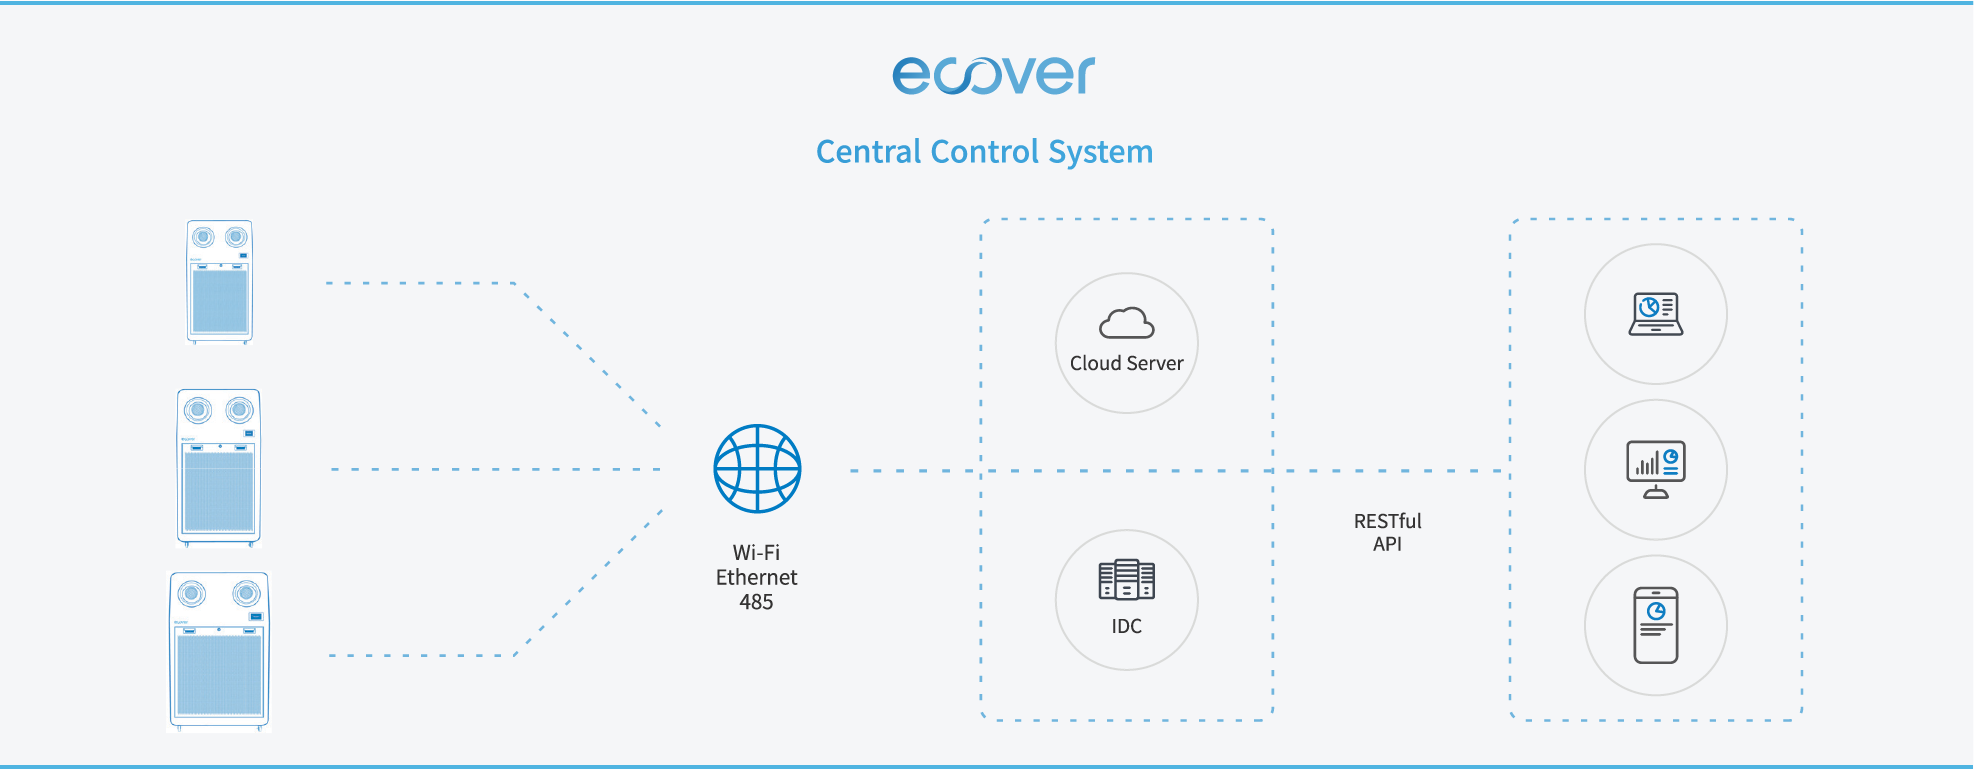 Horizontal image illustrating the Ecover Central Control System